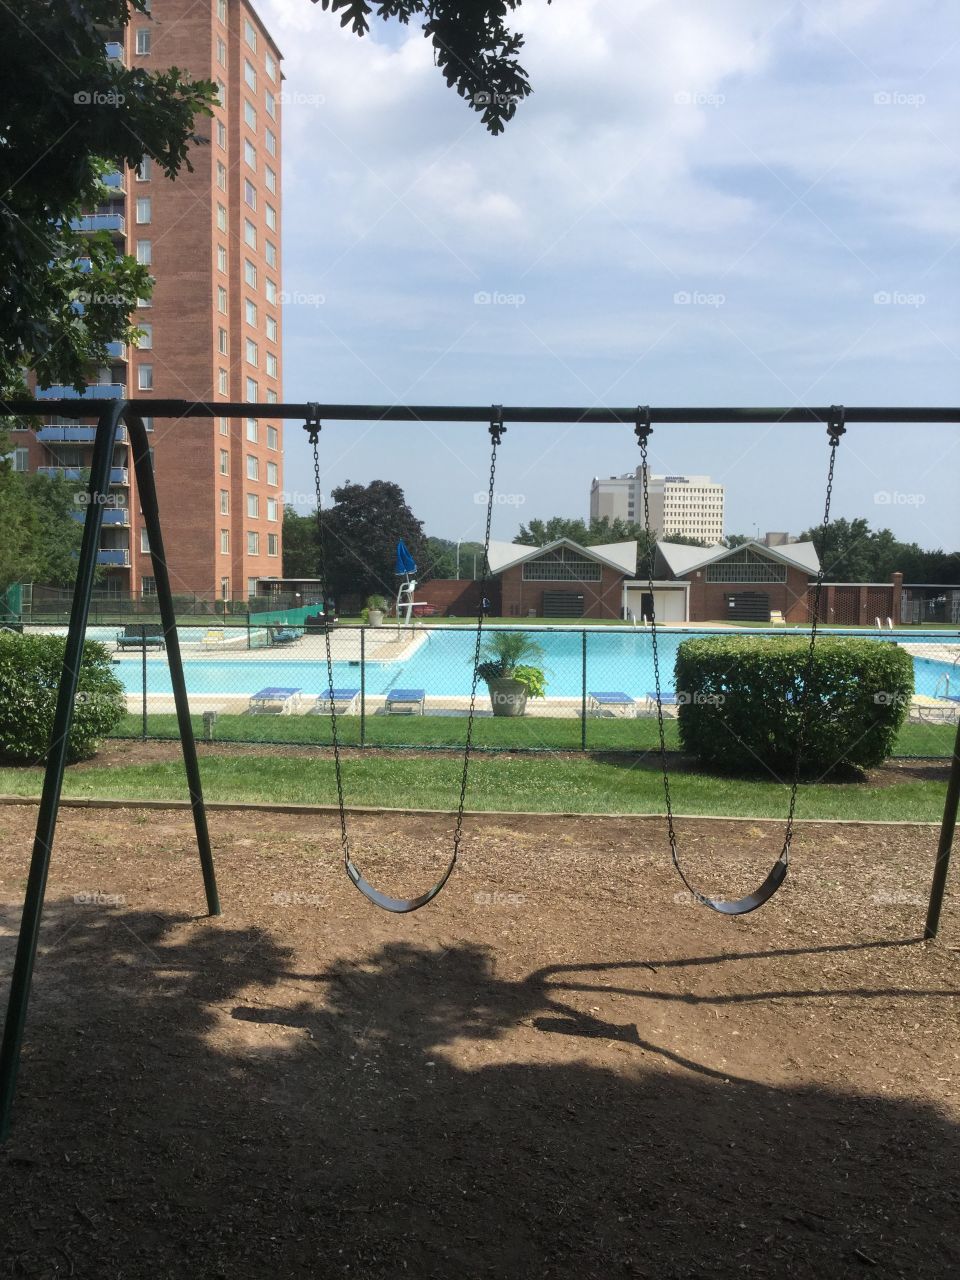 Playground with swings and swimming pool 